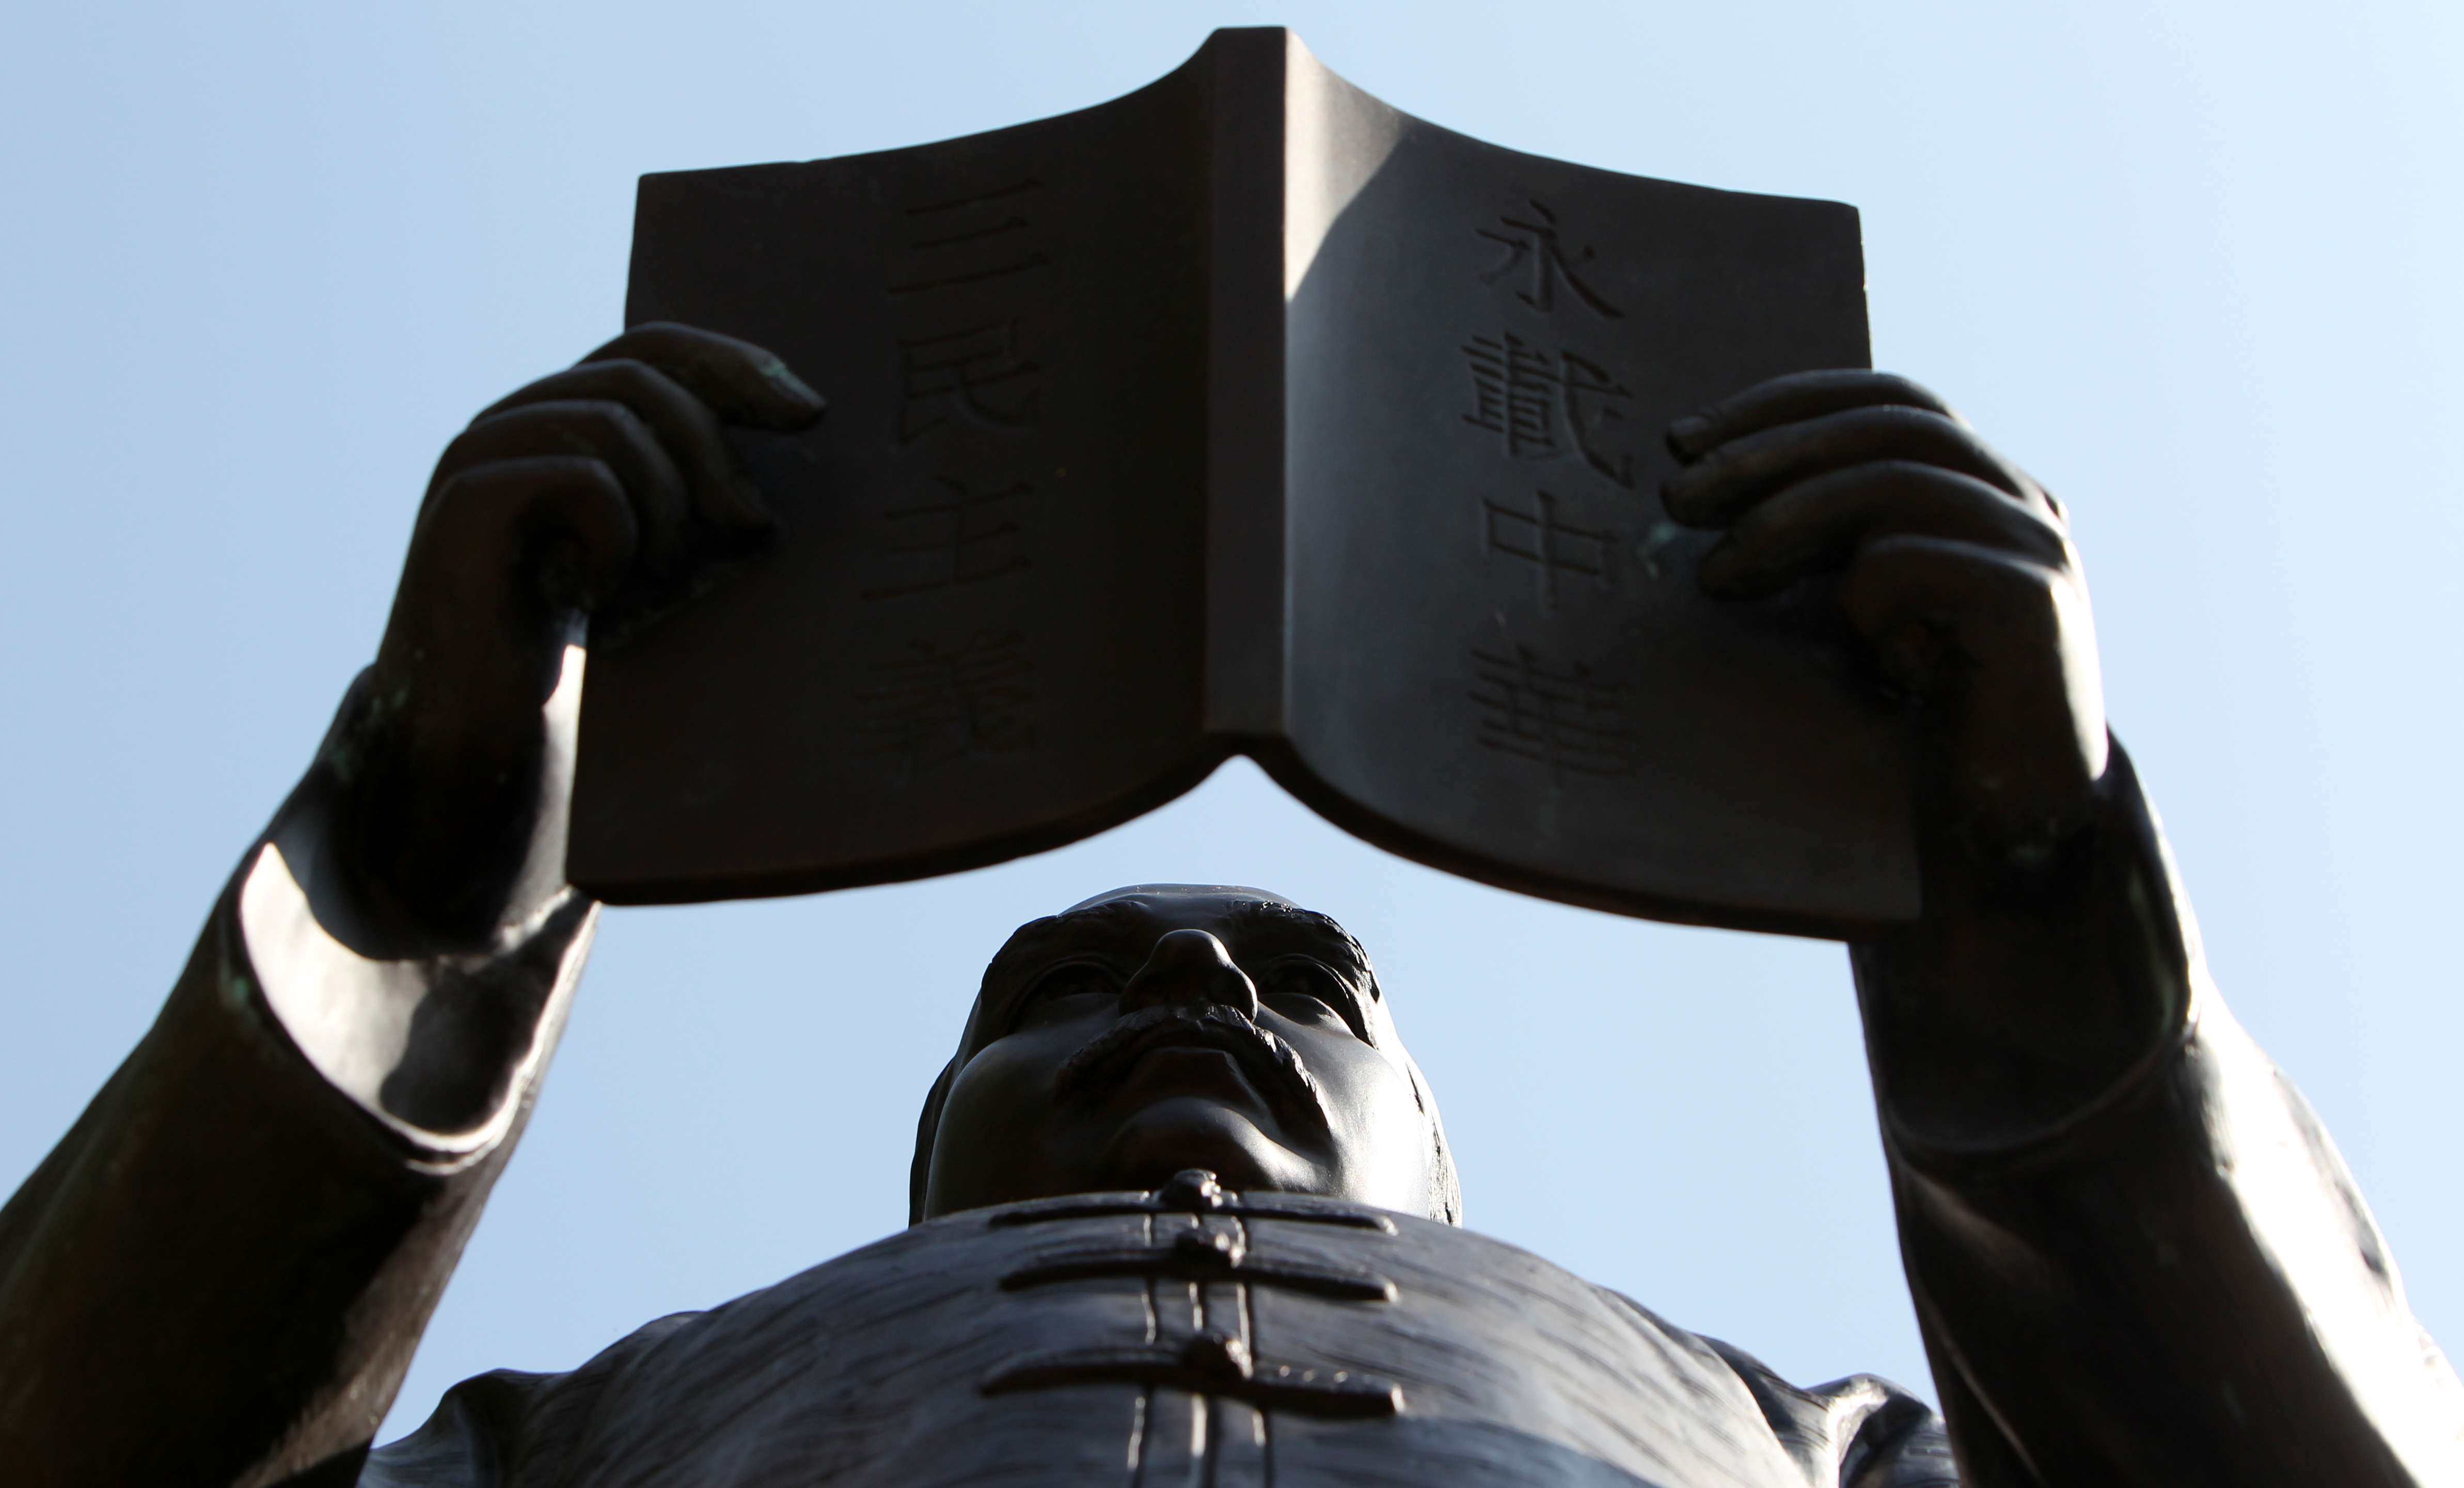 A statue of Sun Yat-sen is displayed at the Hong Kong Institute of Education. Photo: Felix Wong